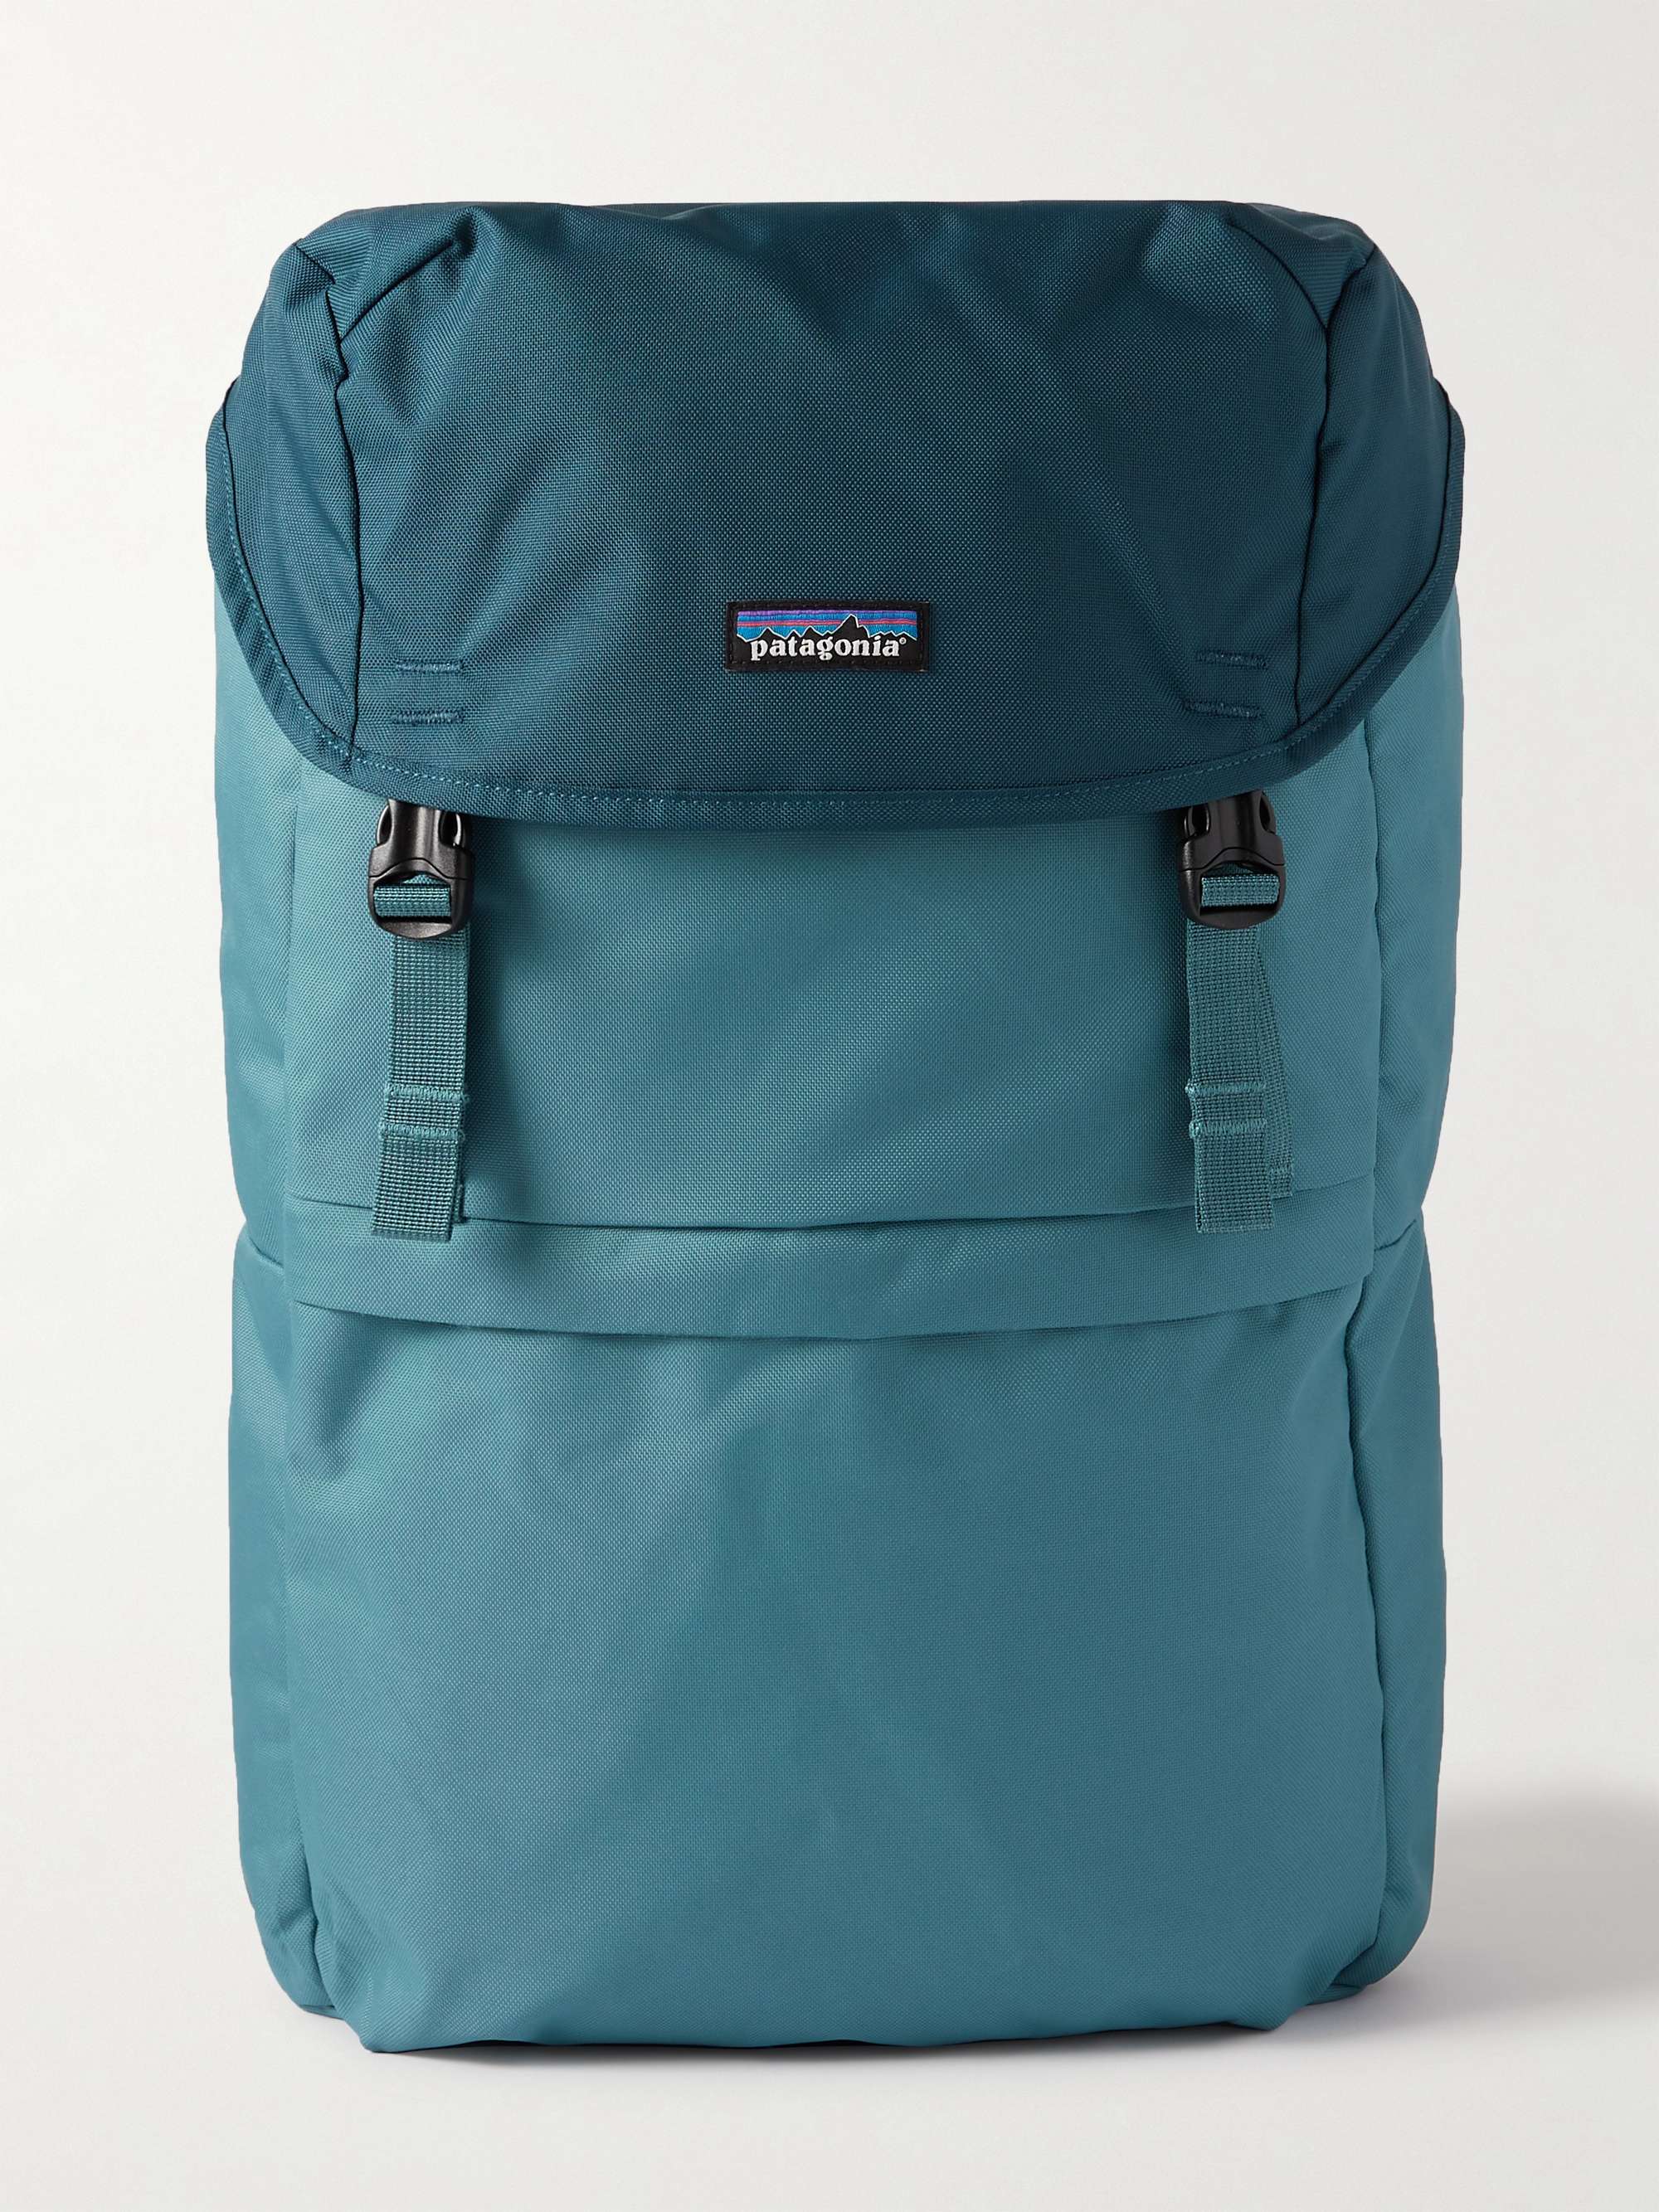 Arbor Lid Recycled Canvas Roll-Top Backpack